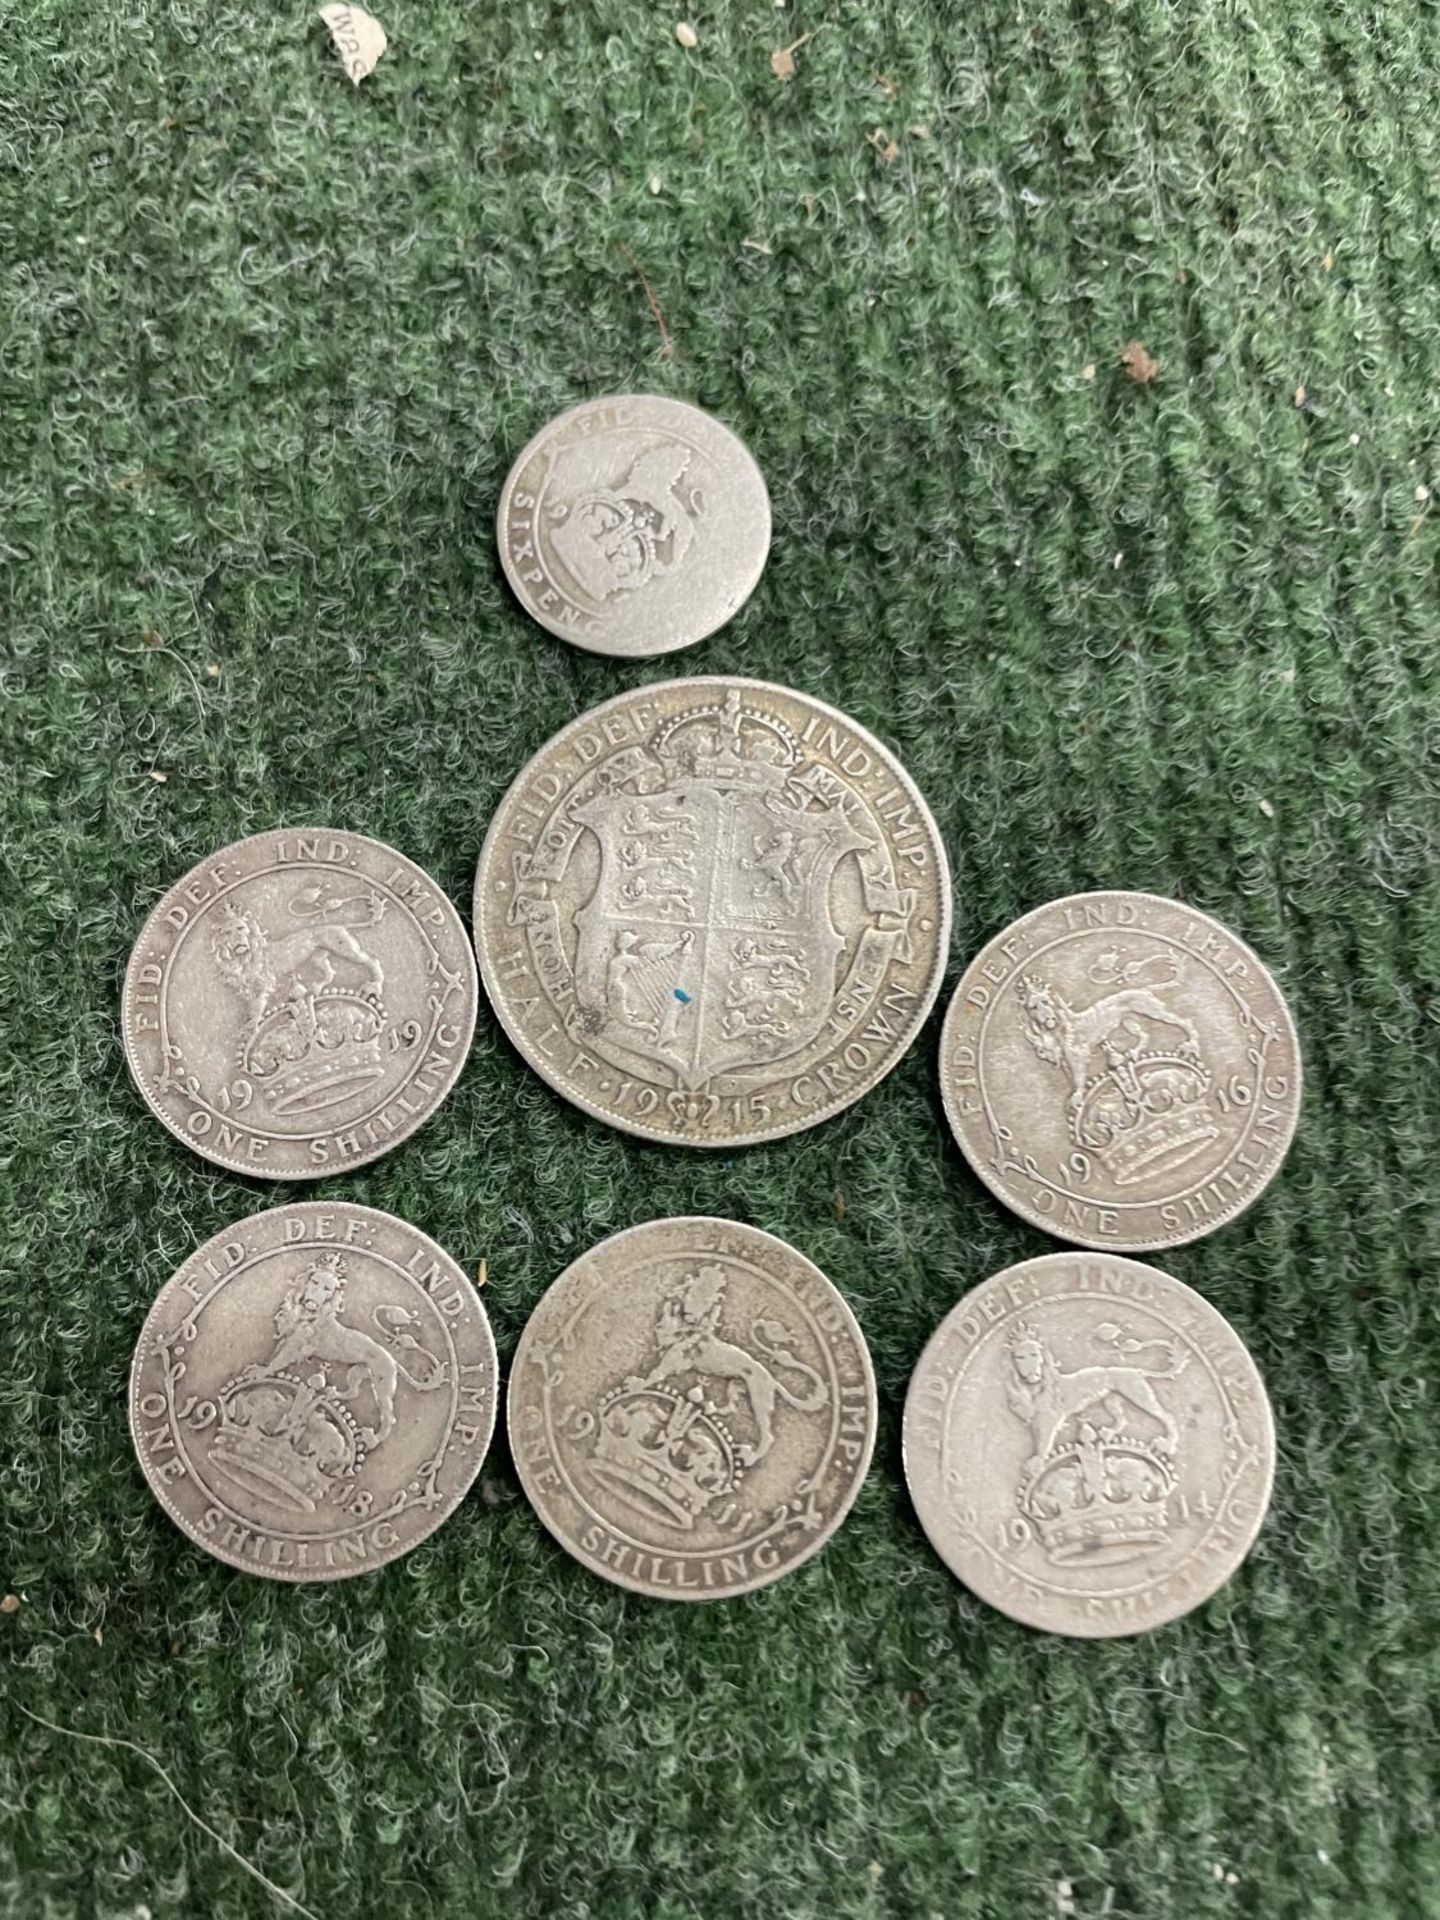 SEVEN PRE 1920 GREAT BRITAIN SILVER COINS TO INCLUDE A HALF CROWN, A SIXPENCE AND FIVE SHILLINGS - Image 2 of 3